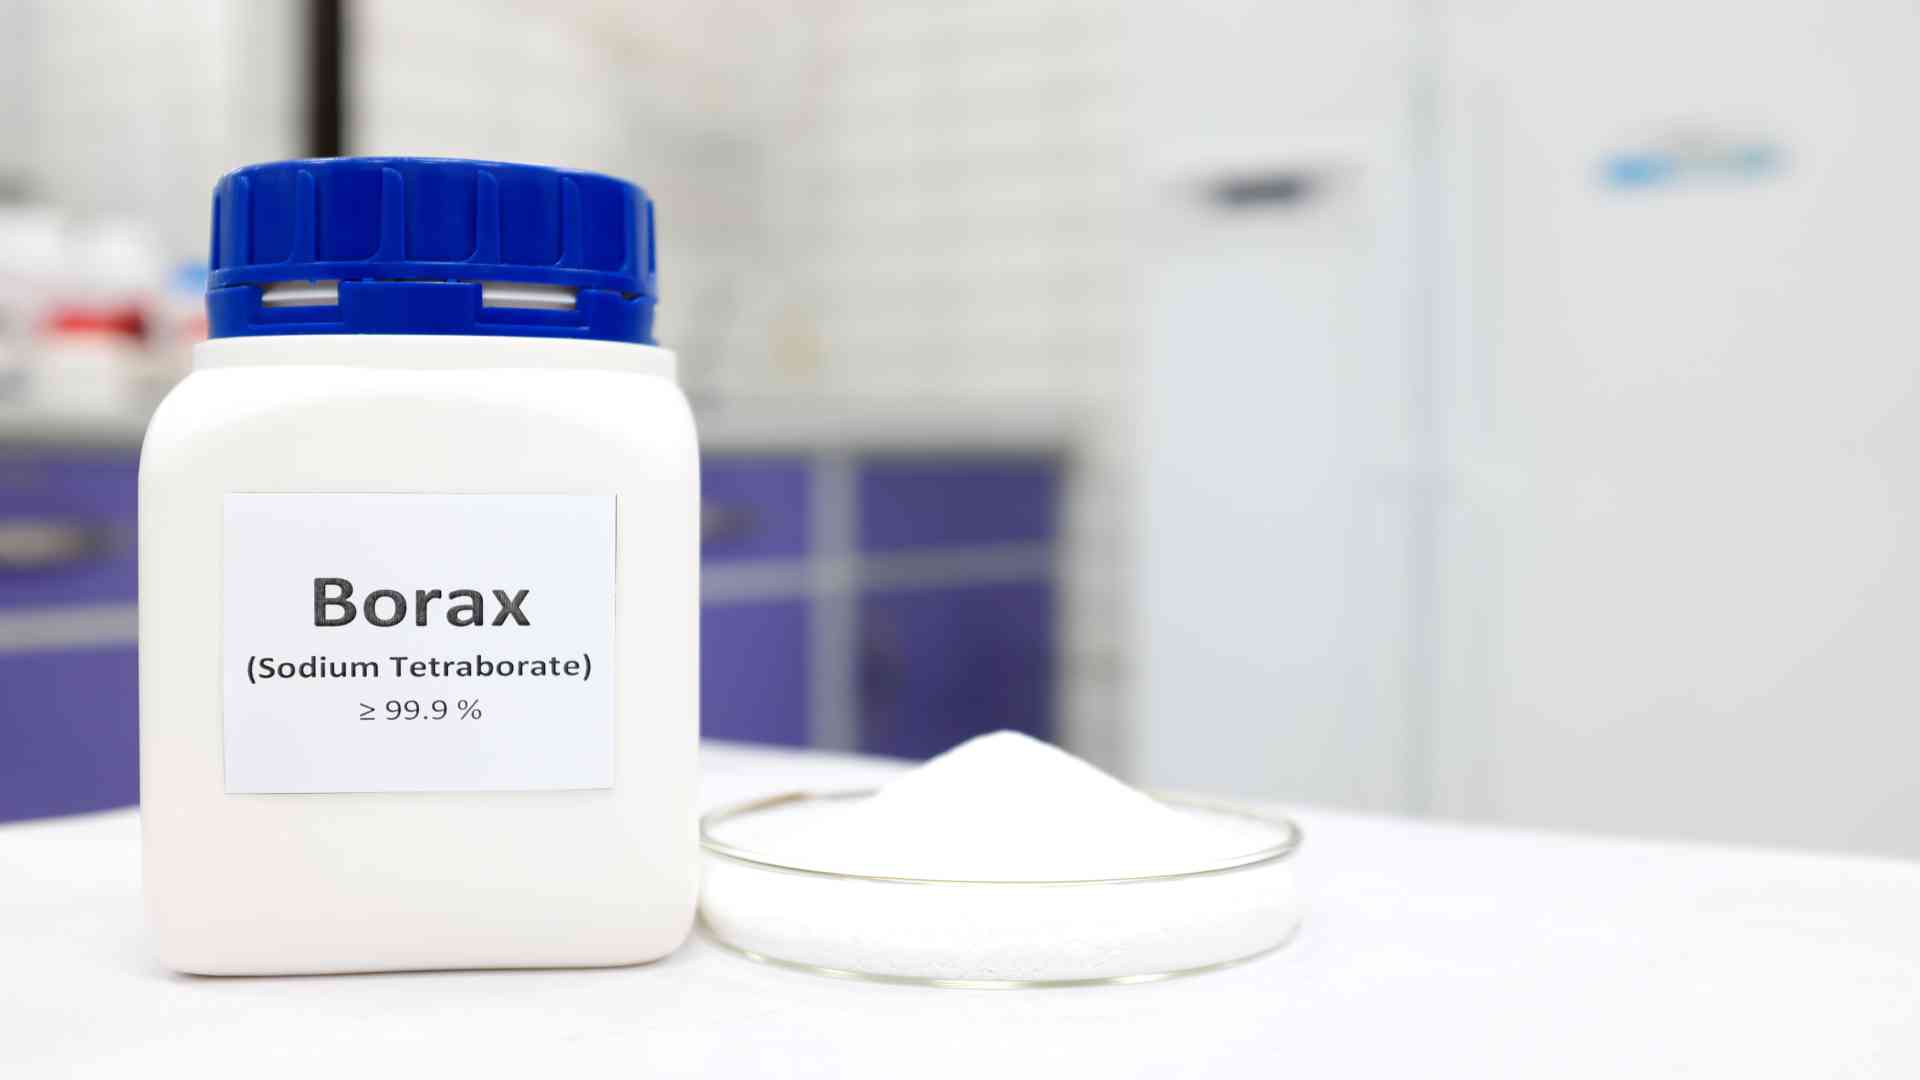 Borax: The Safe And Effective Detergent